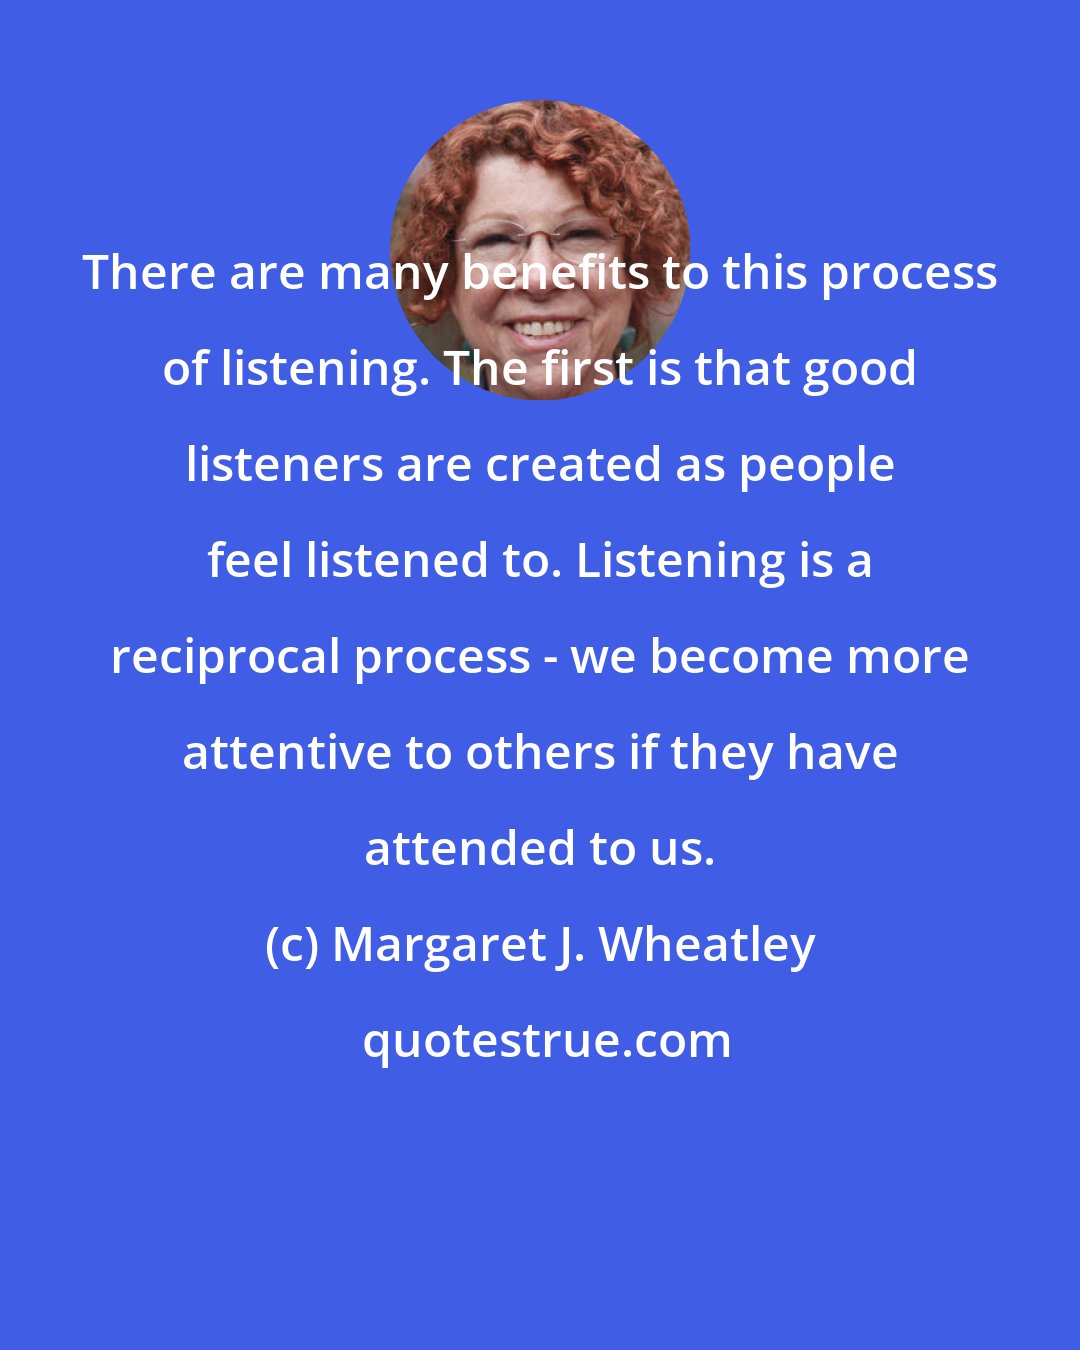 Margaret J. Wheatley: There are many benefits to this process of listening. The first is that good listeners are created as people feel listened to. Listening is a reciprocal process - we become more attentive to others if they have attended to us.